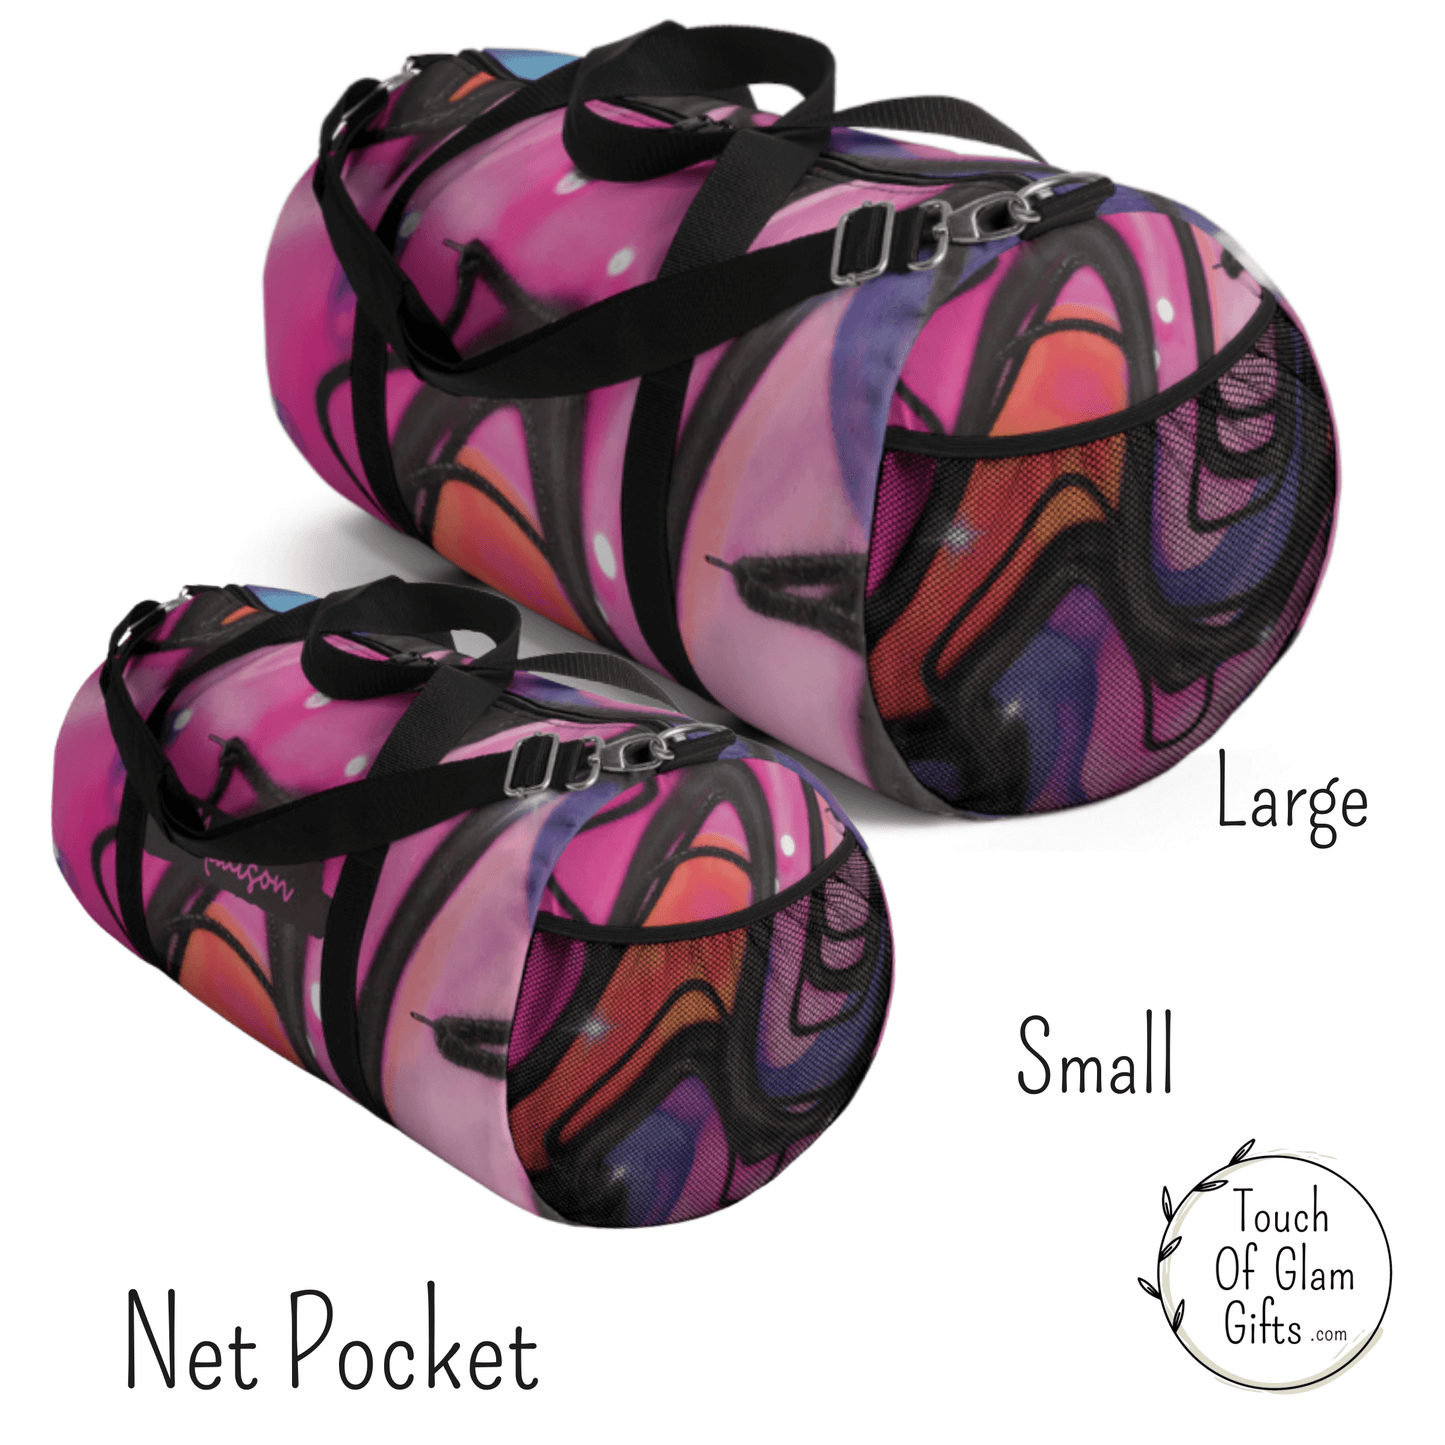 Our pink retro weekender bag has a netted pocket on one side for extra storage capacity. The small and large duffel bags are the exact print, just different sizes. The small pink duffel has a personalized name on the front and the large is plain.